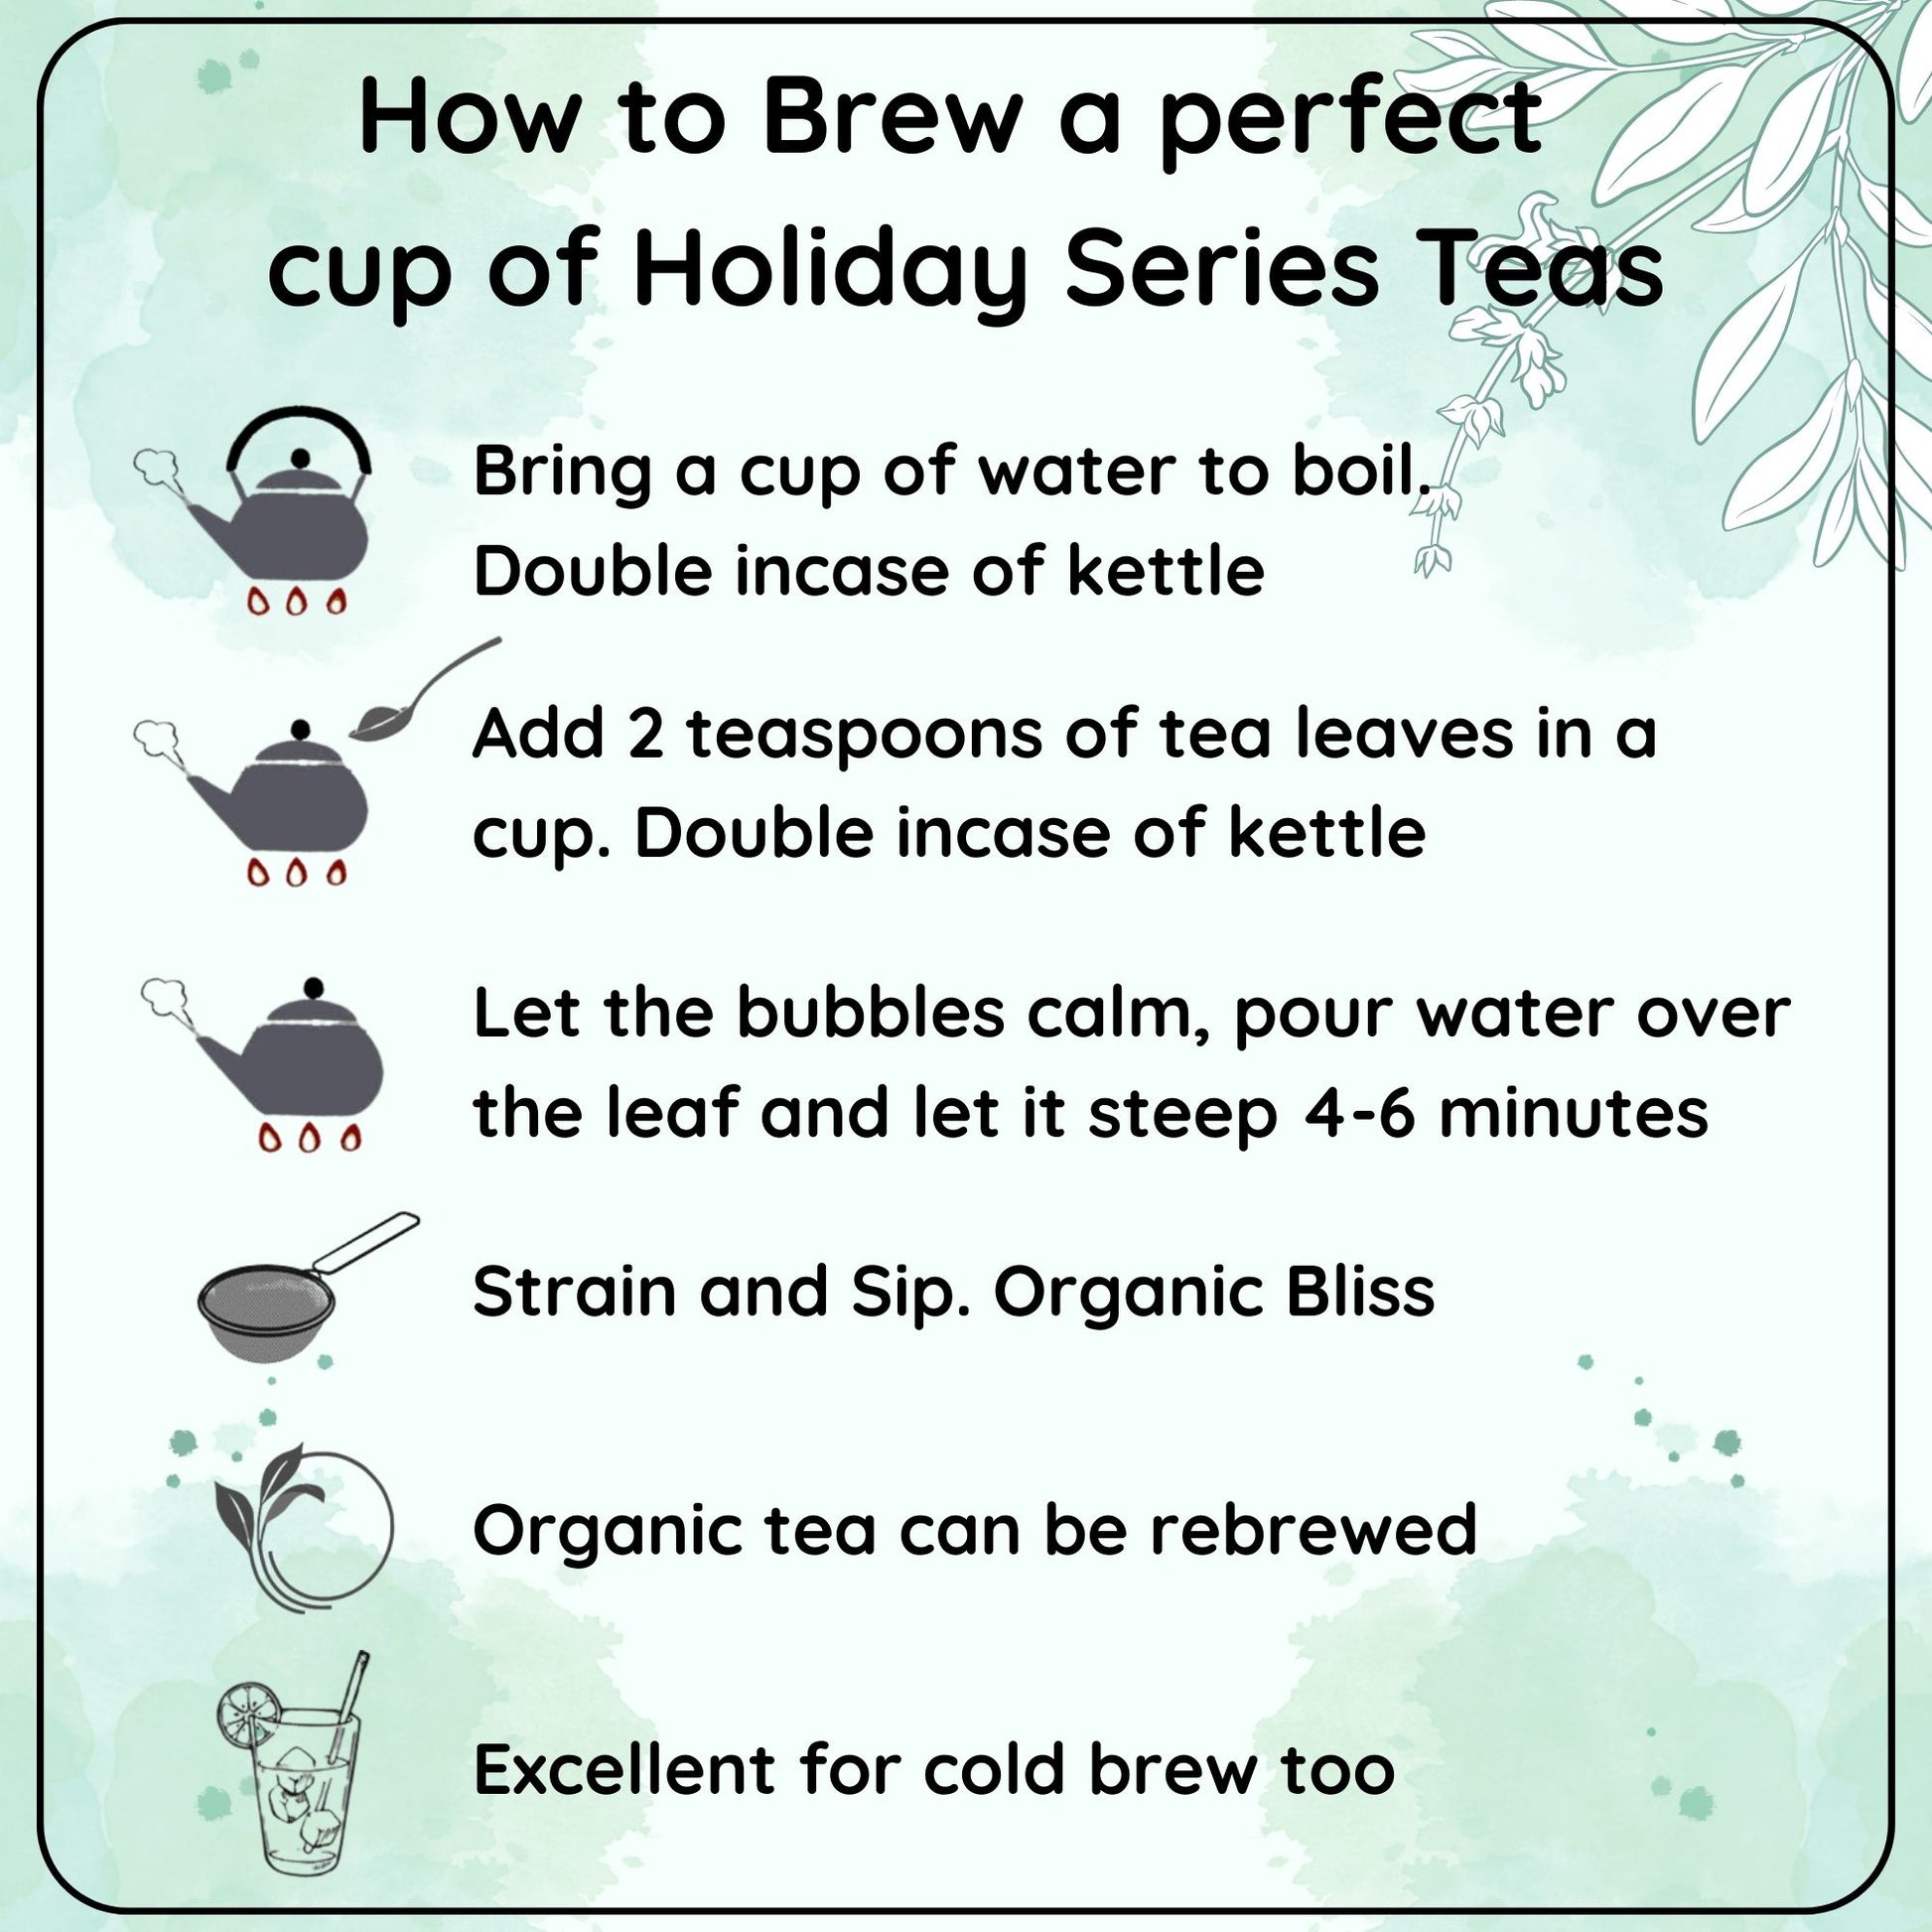 The Holiday Series - Wishing happiness in every brew, Makes 125 Cups - Radhikas Fine Teas and Whatnots 